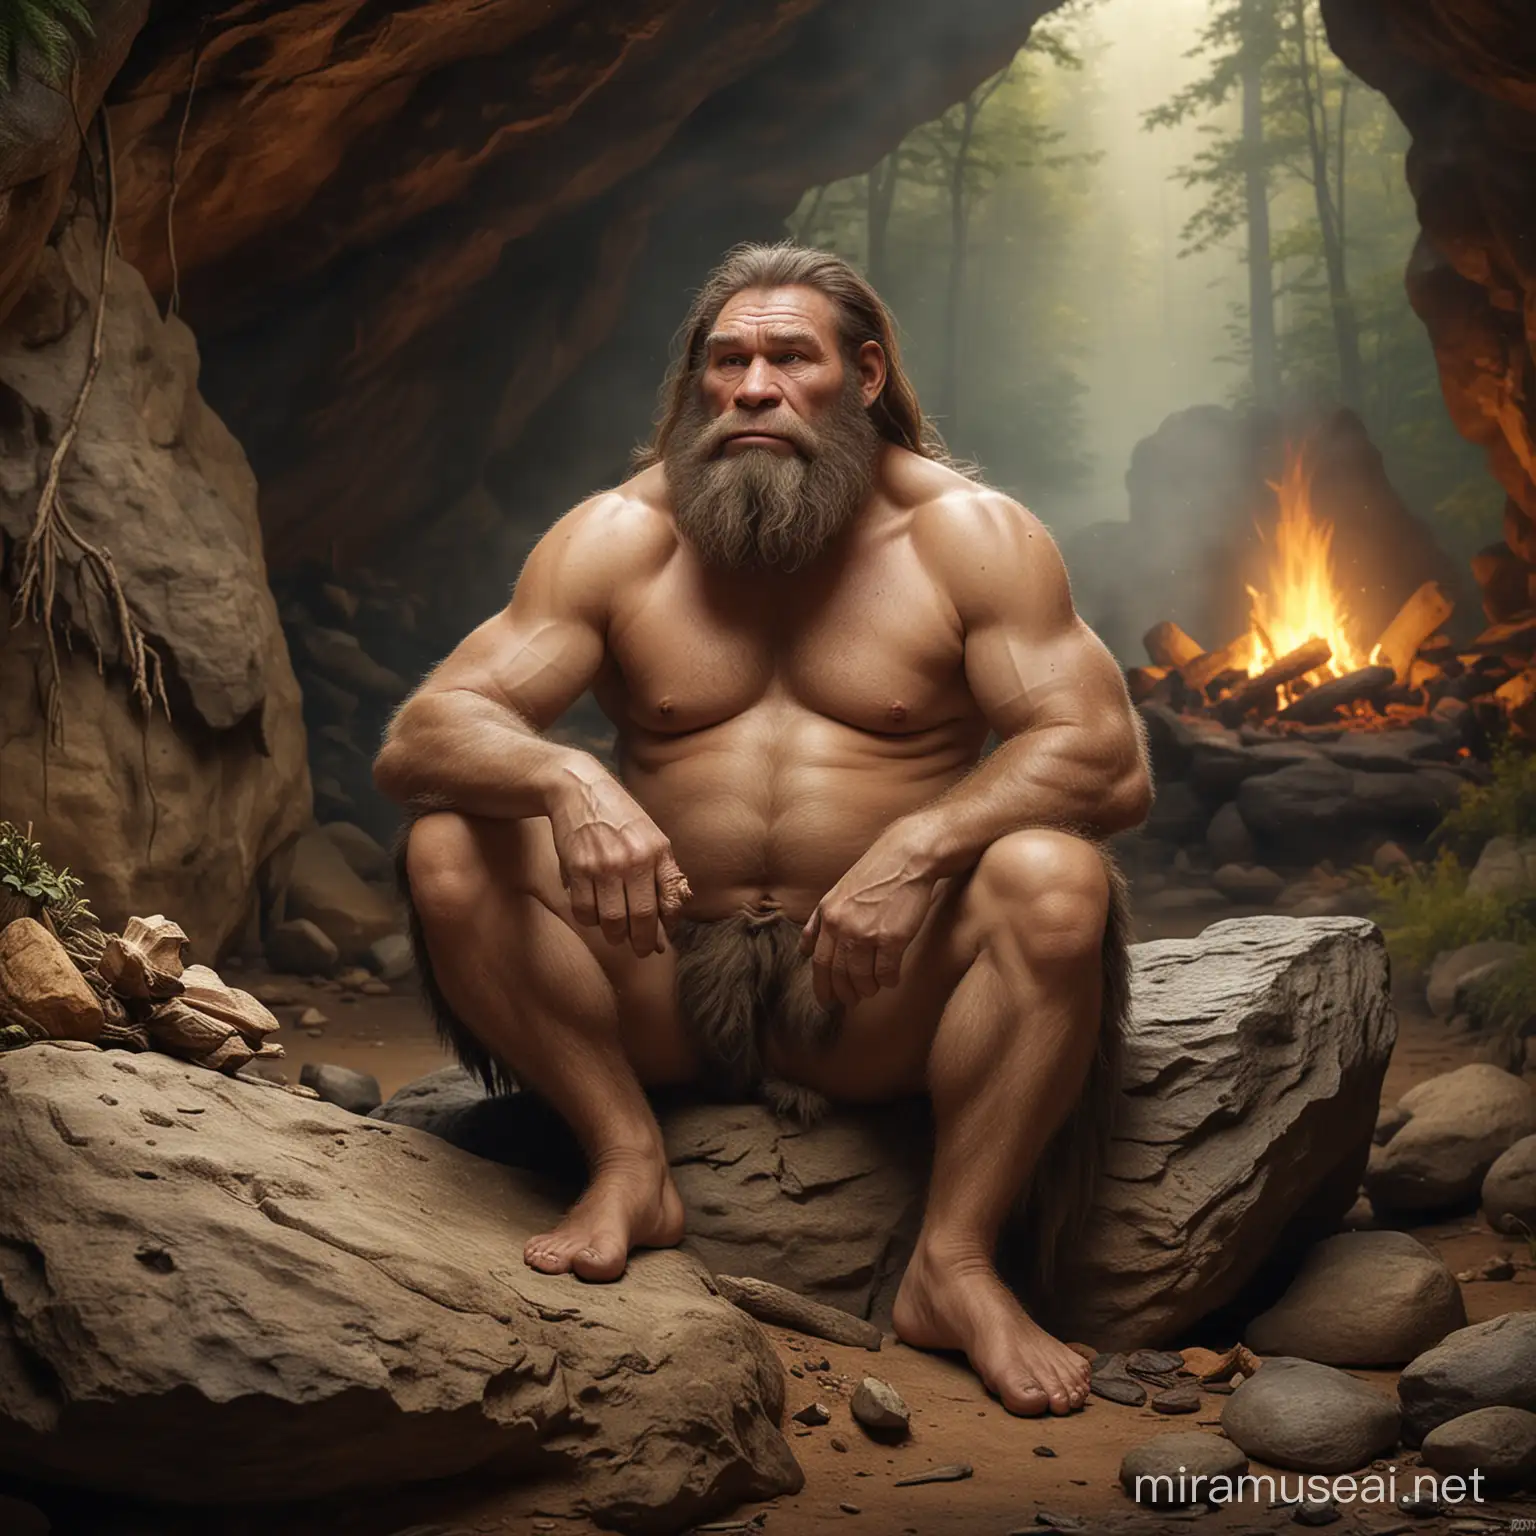 neanderthal,chubby,barefoot,hairy,loincloth,long beard,sitting on rock ,forest cave background,primitivism,camp fire,old man,Alex Petruk APe,arnold render,mud on body